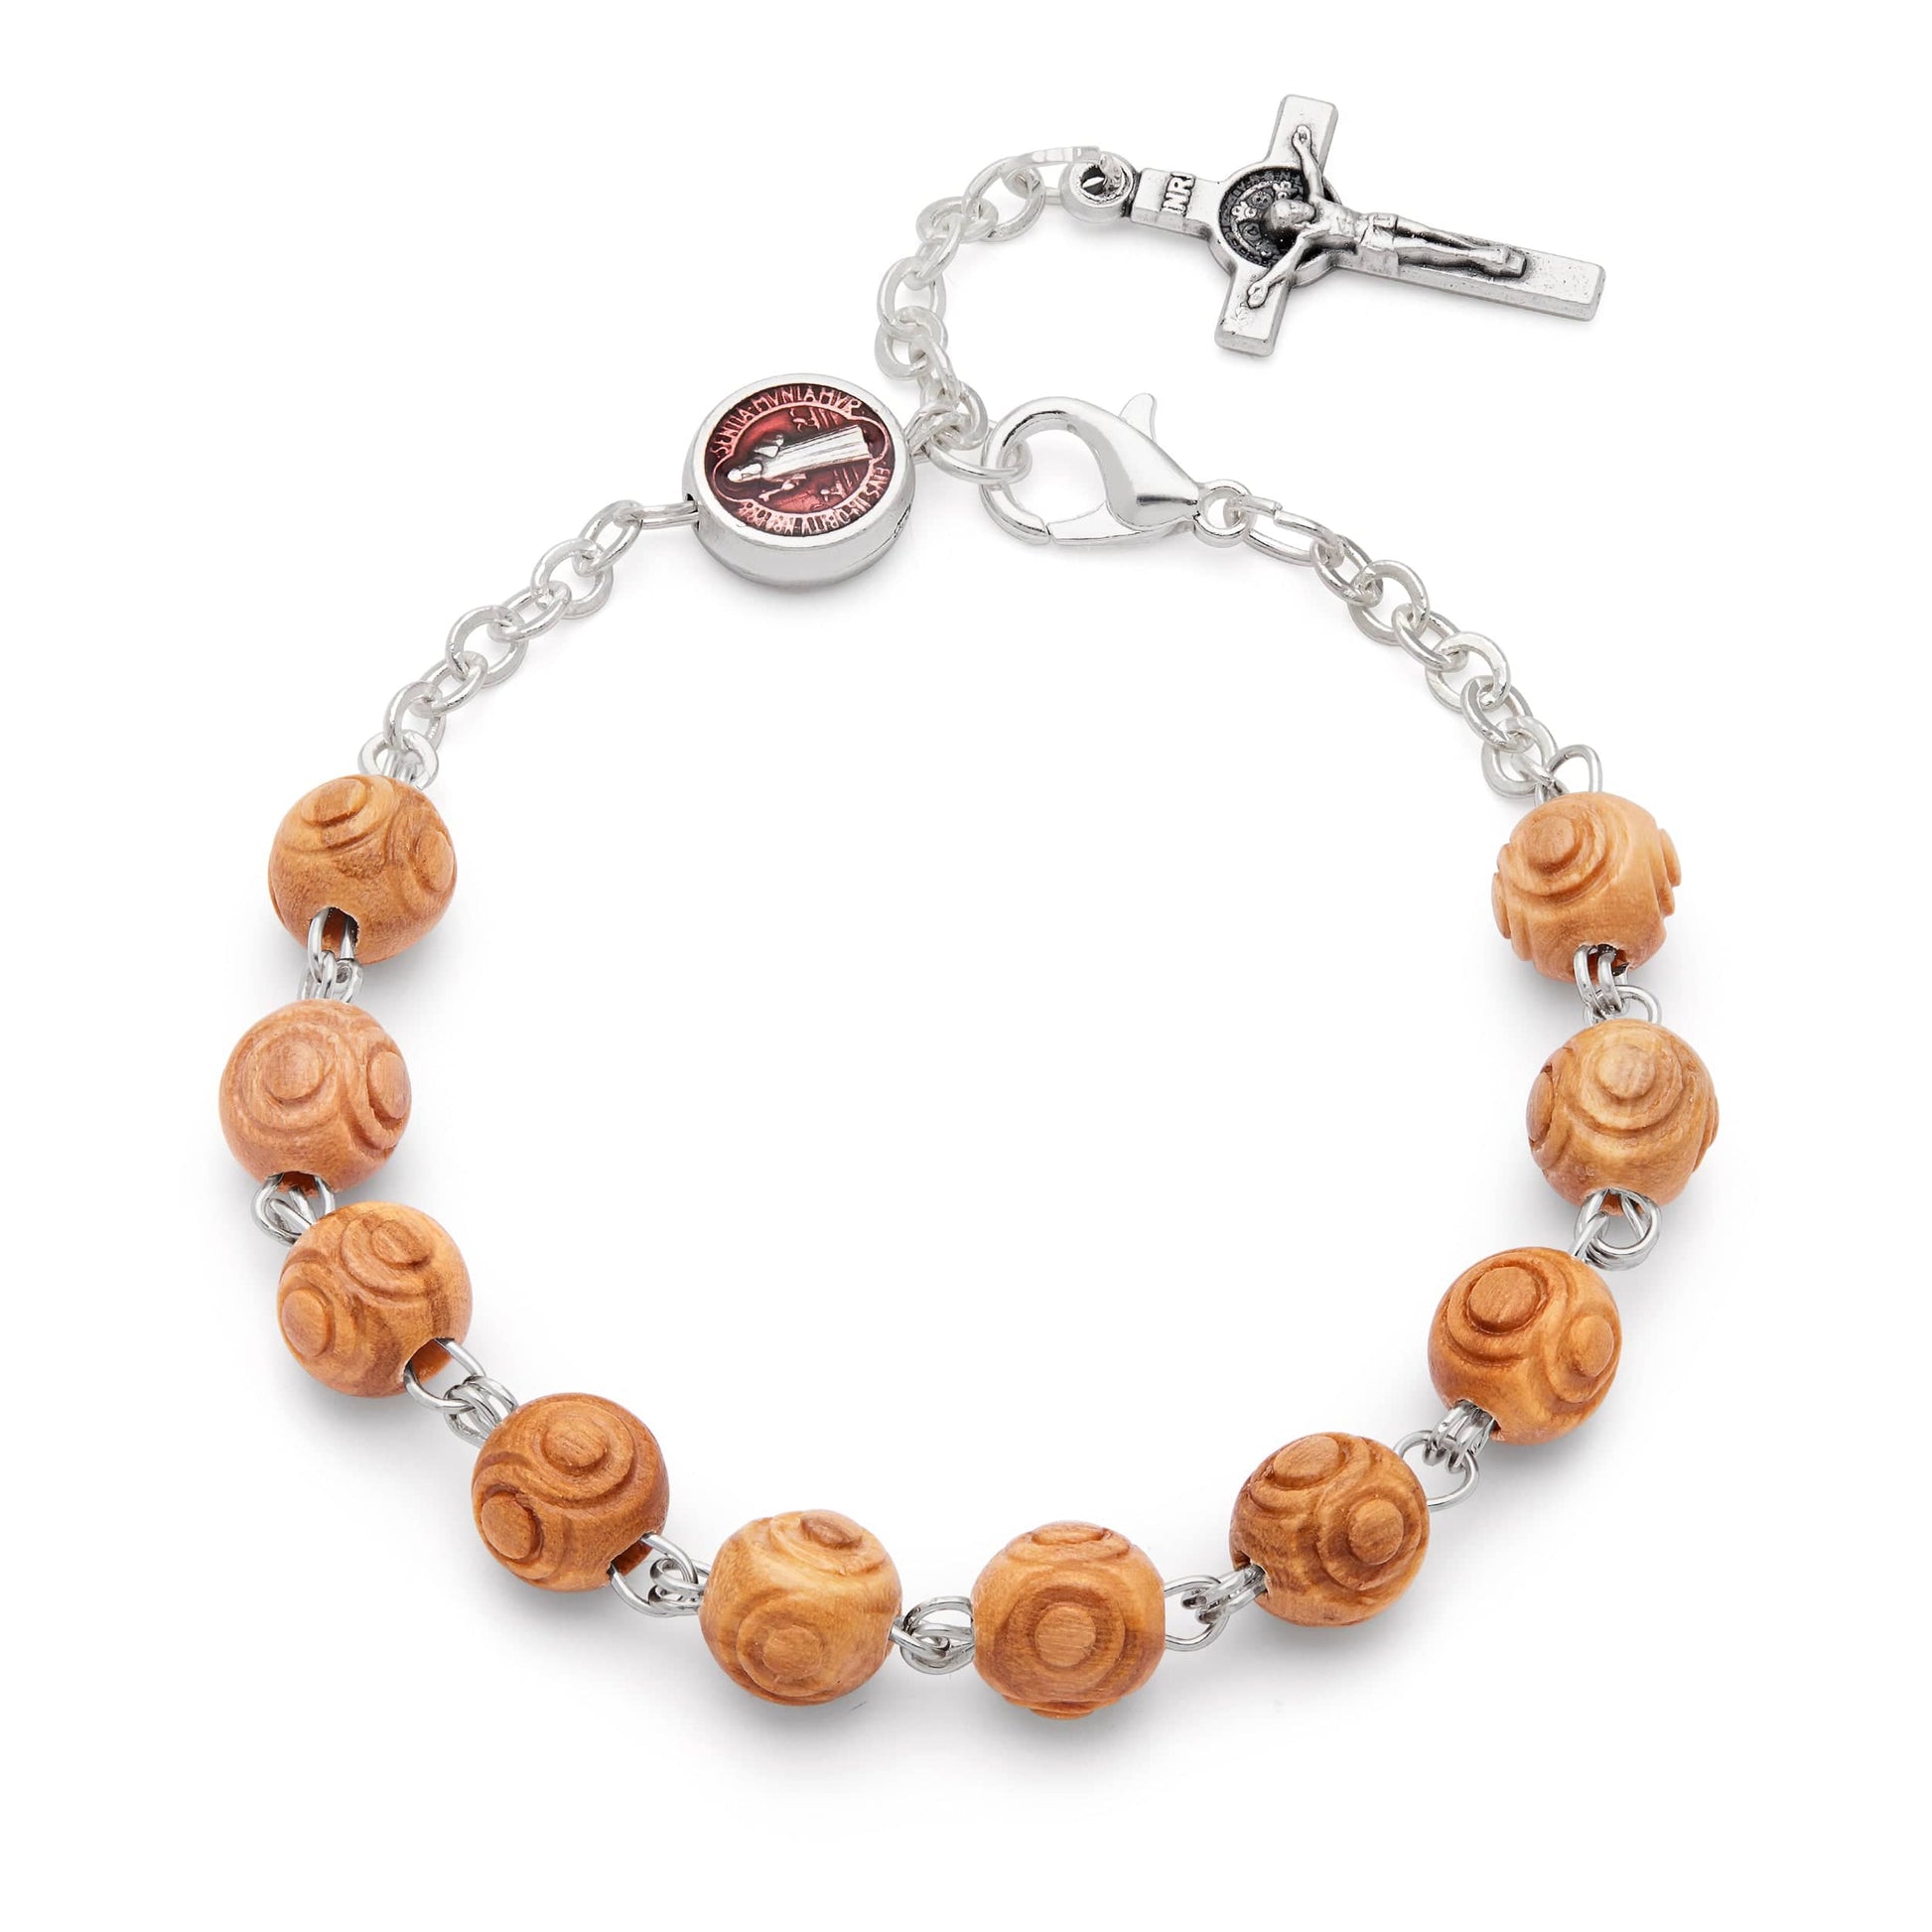 Mondo Cattolico 20 cm (7.9 in) / 7.5 mm (0.3 in) St. Benedict Rosary Bracelet in olive wood beads with enamel cross and crucifix